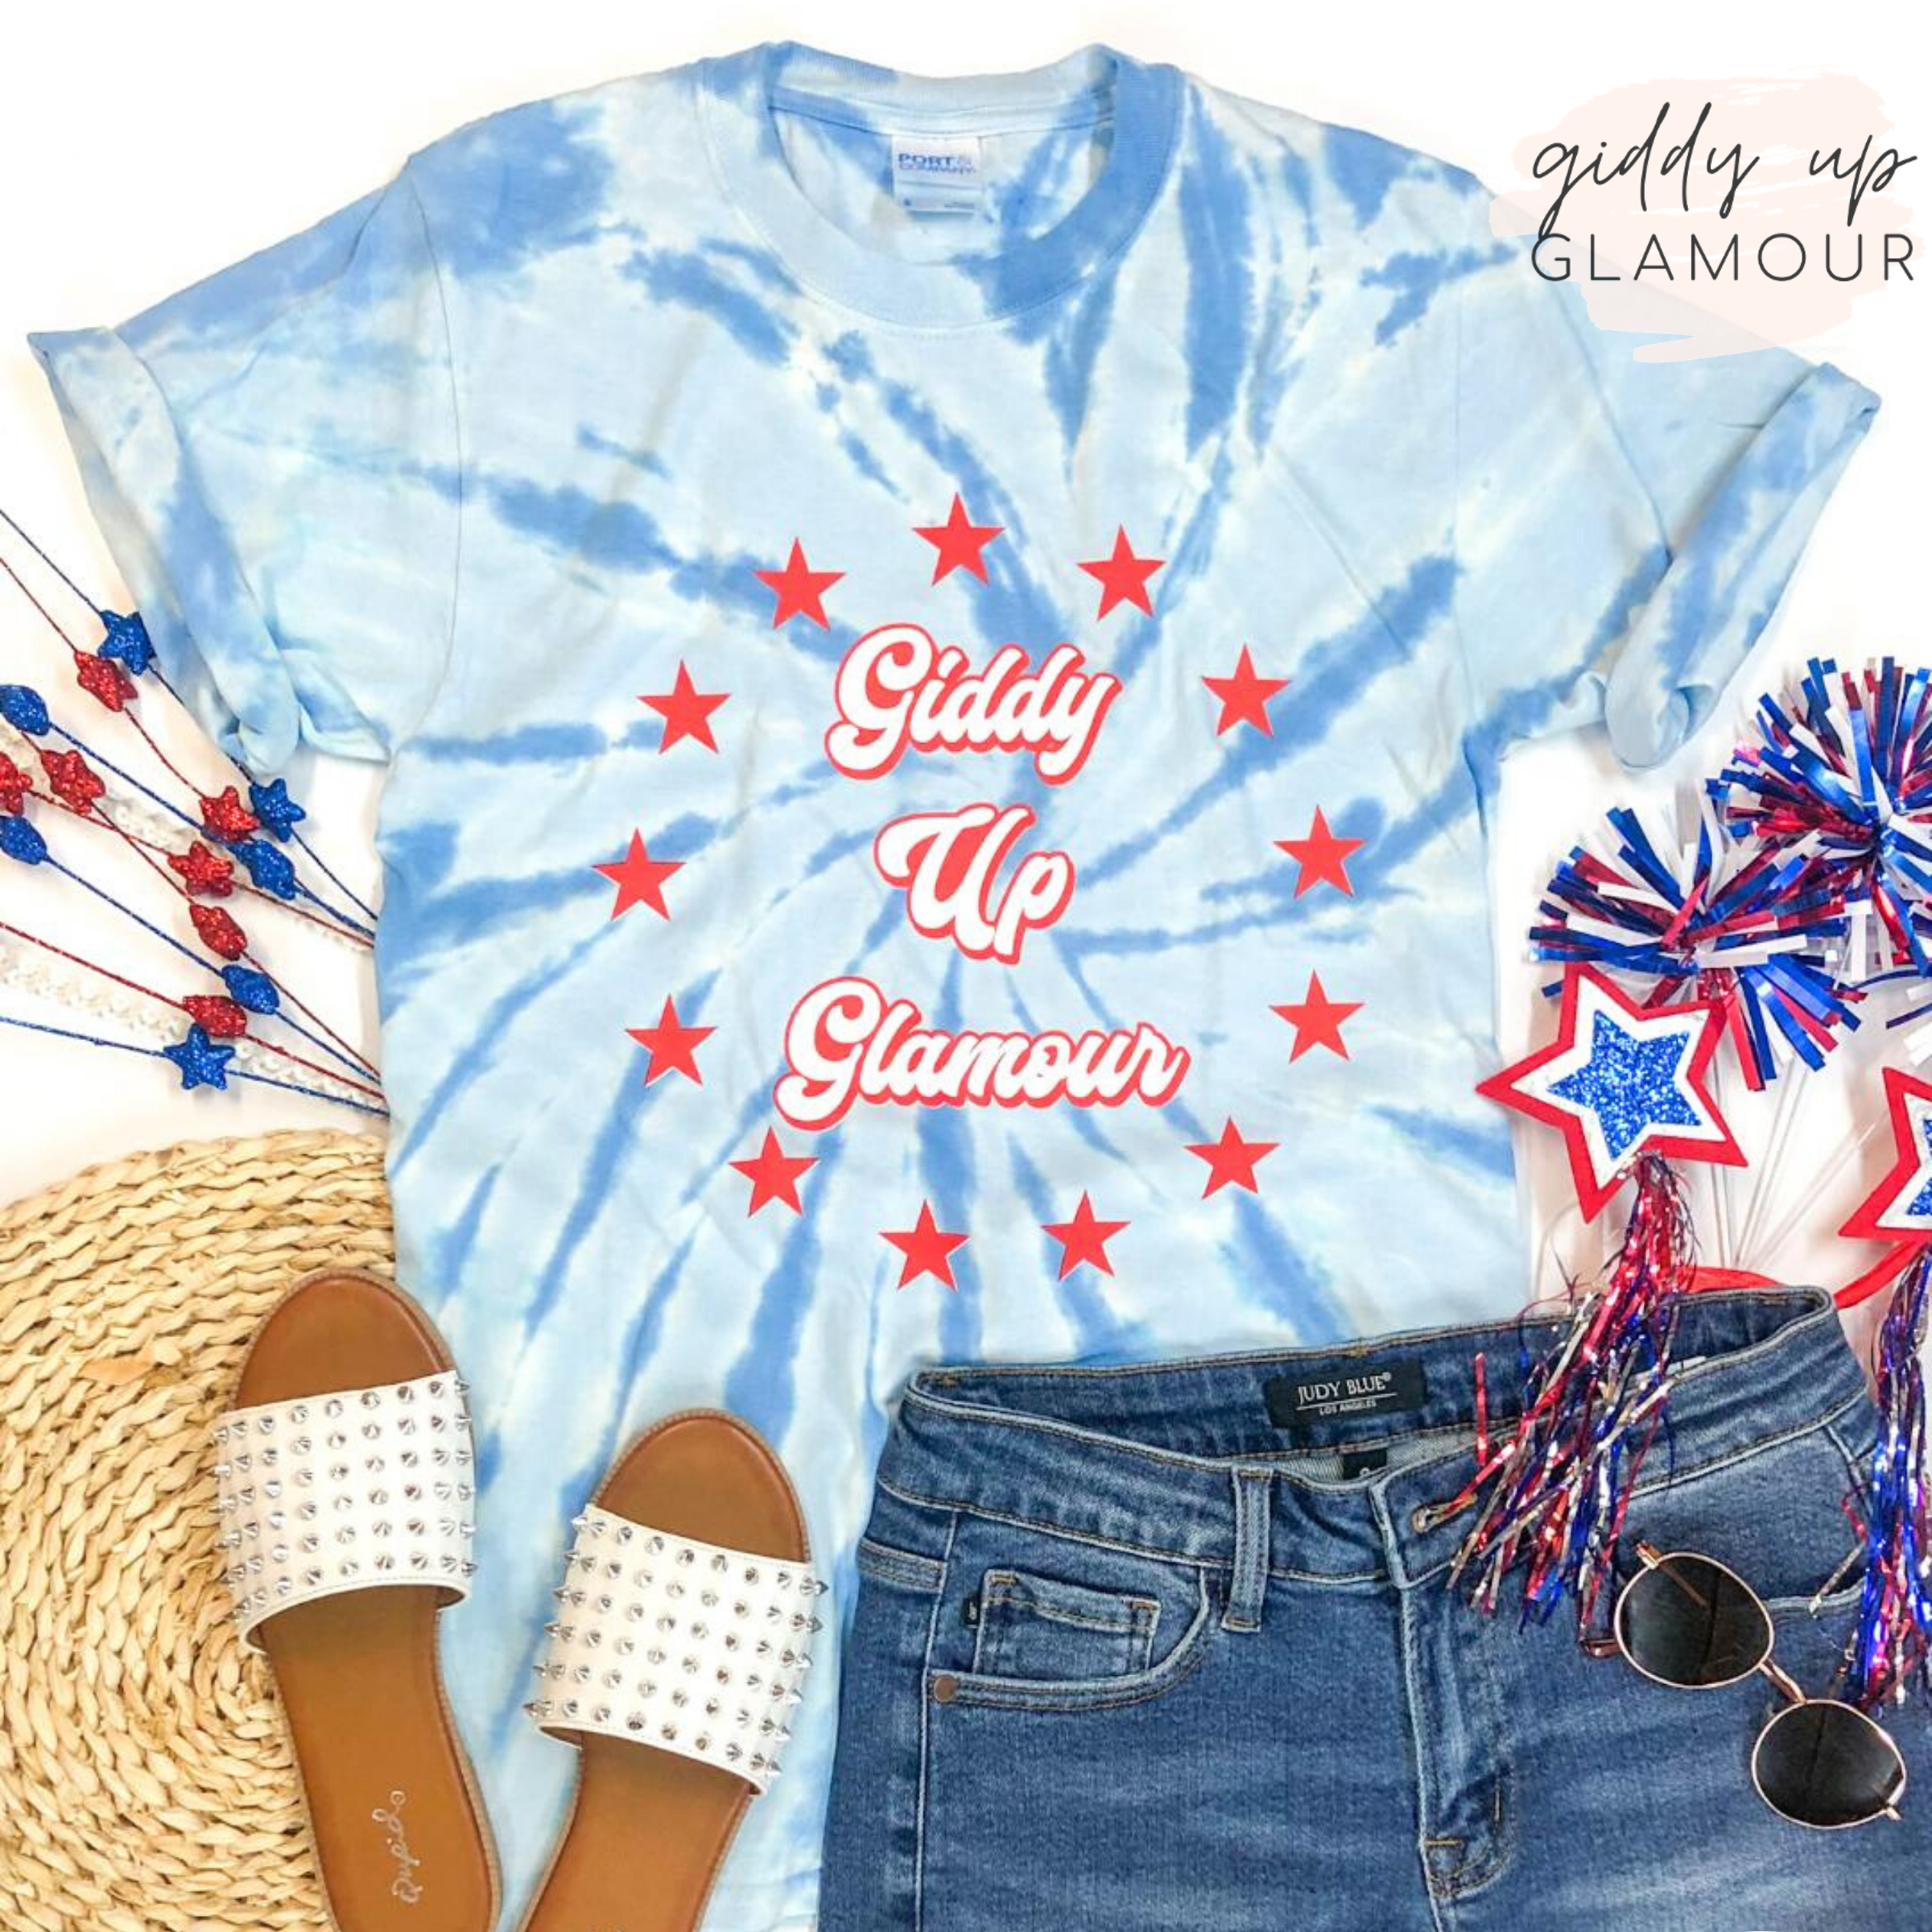 Giddy Up Glamour Tie Dye Graphic Logo Tee in Red and Blue - Giddy Up Glamour Boutique